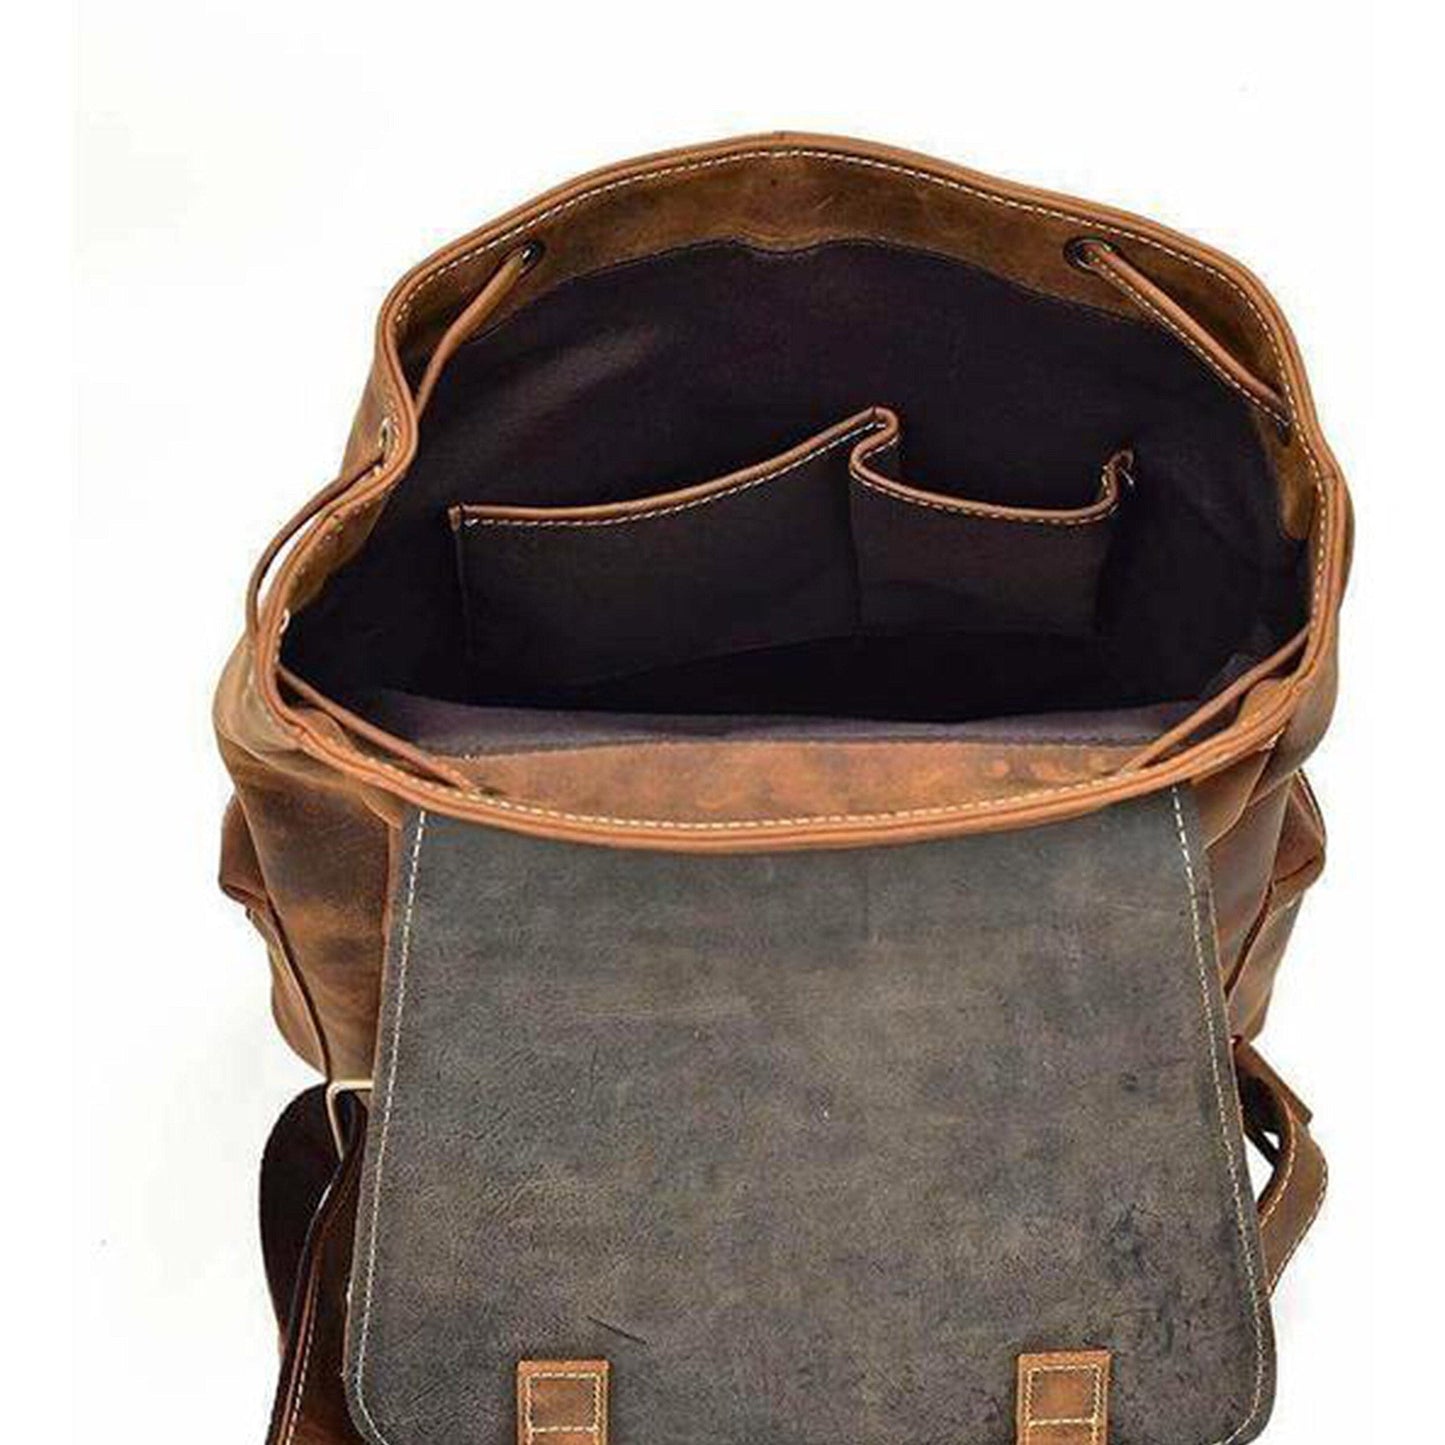 The Armstrong Buffalo Backpack - The Tool Store